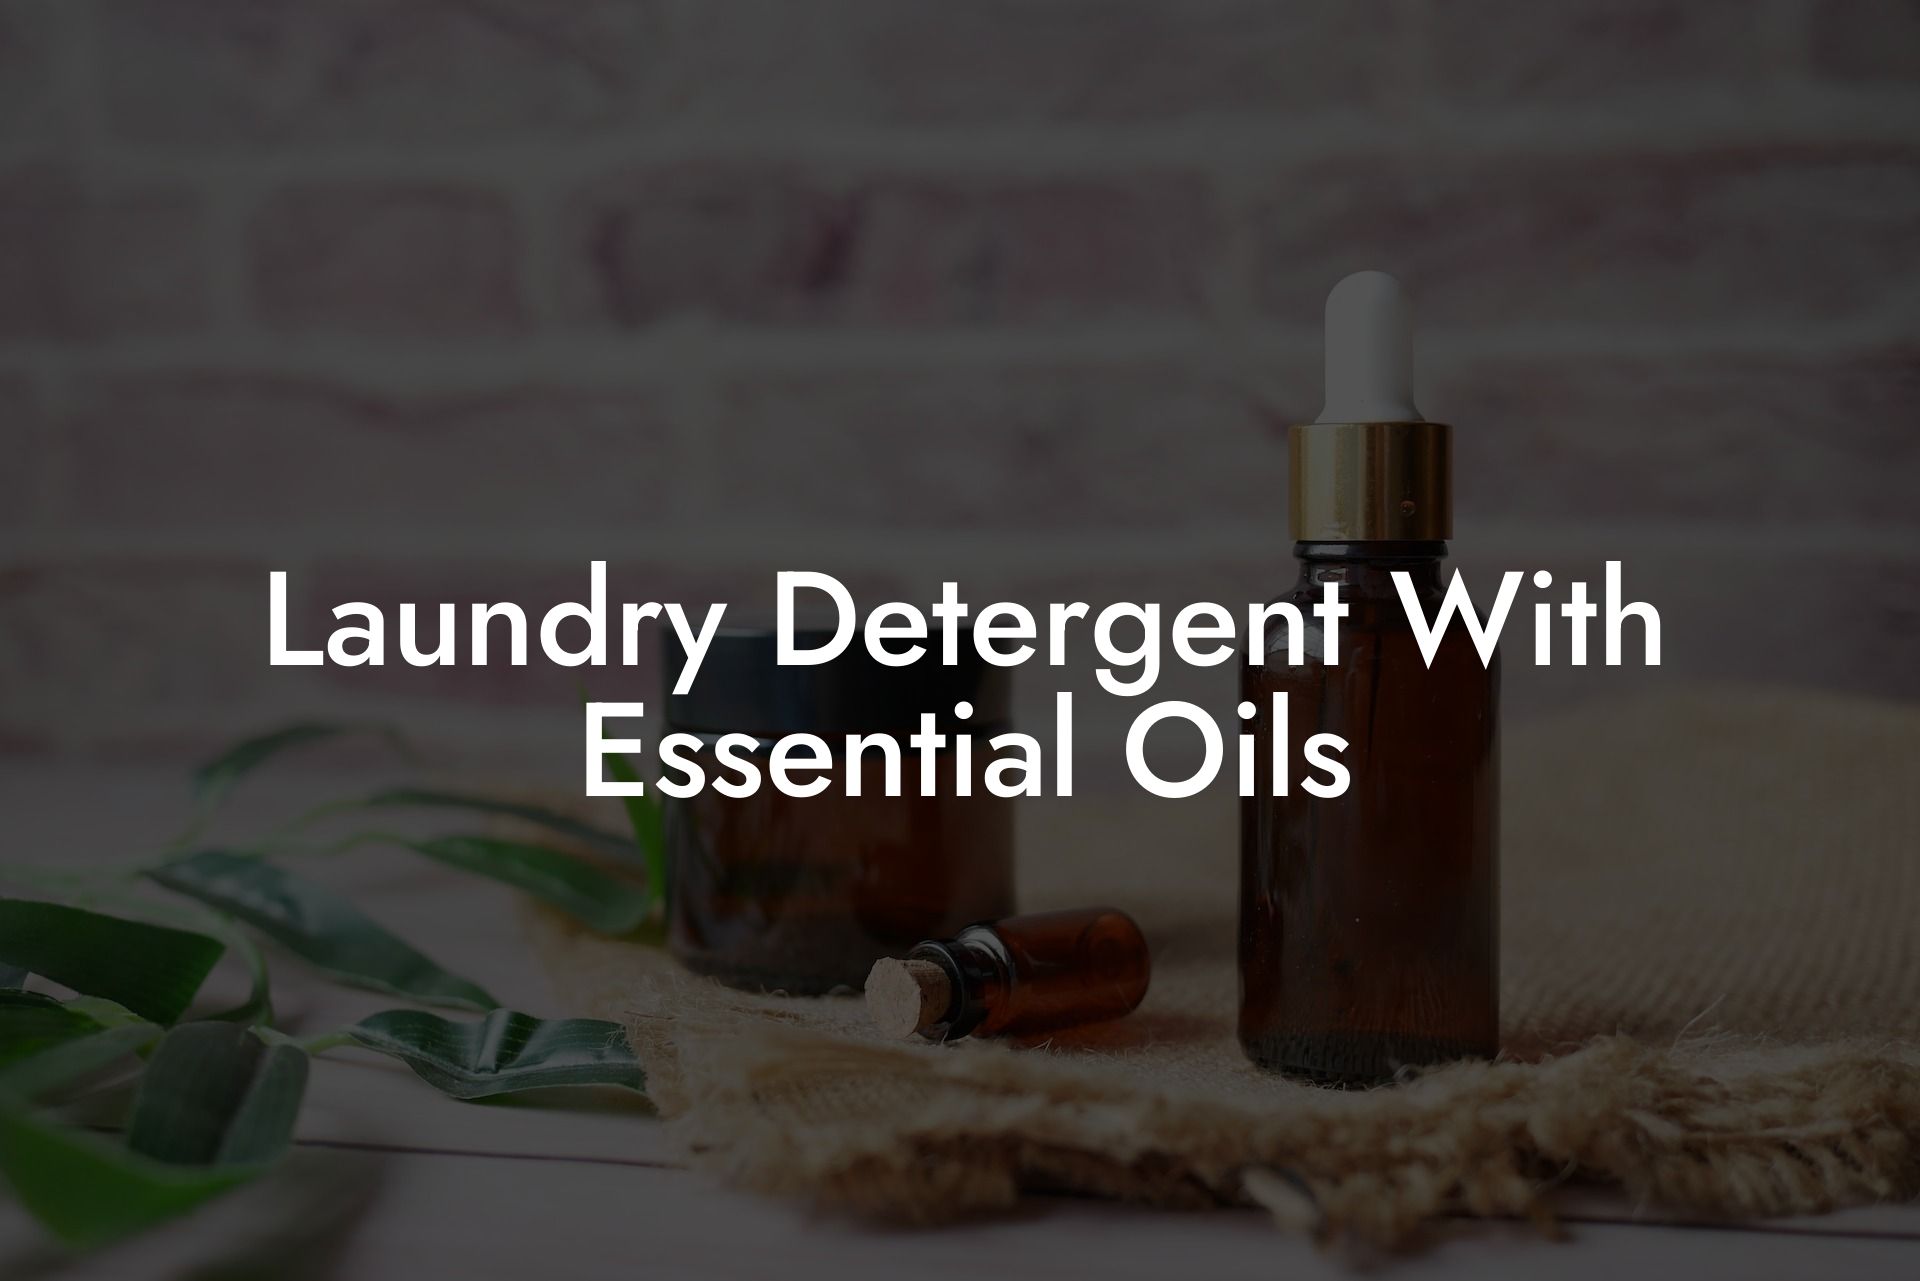 Laundry Detergent With Essential Oils